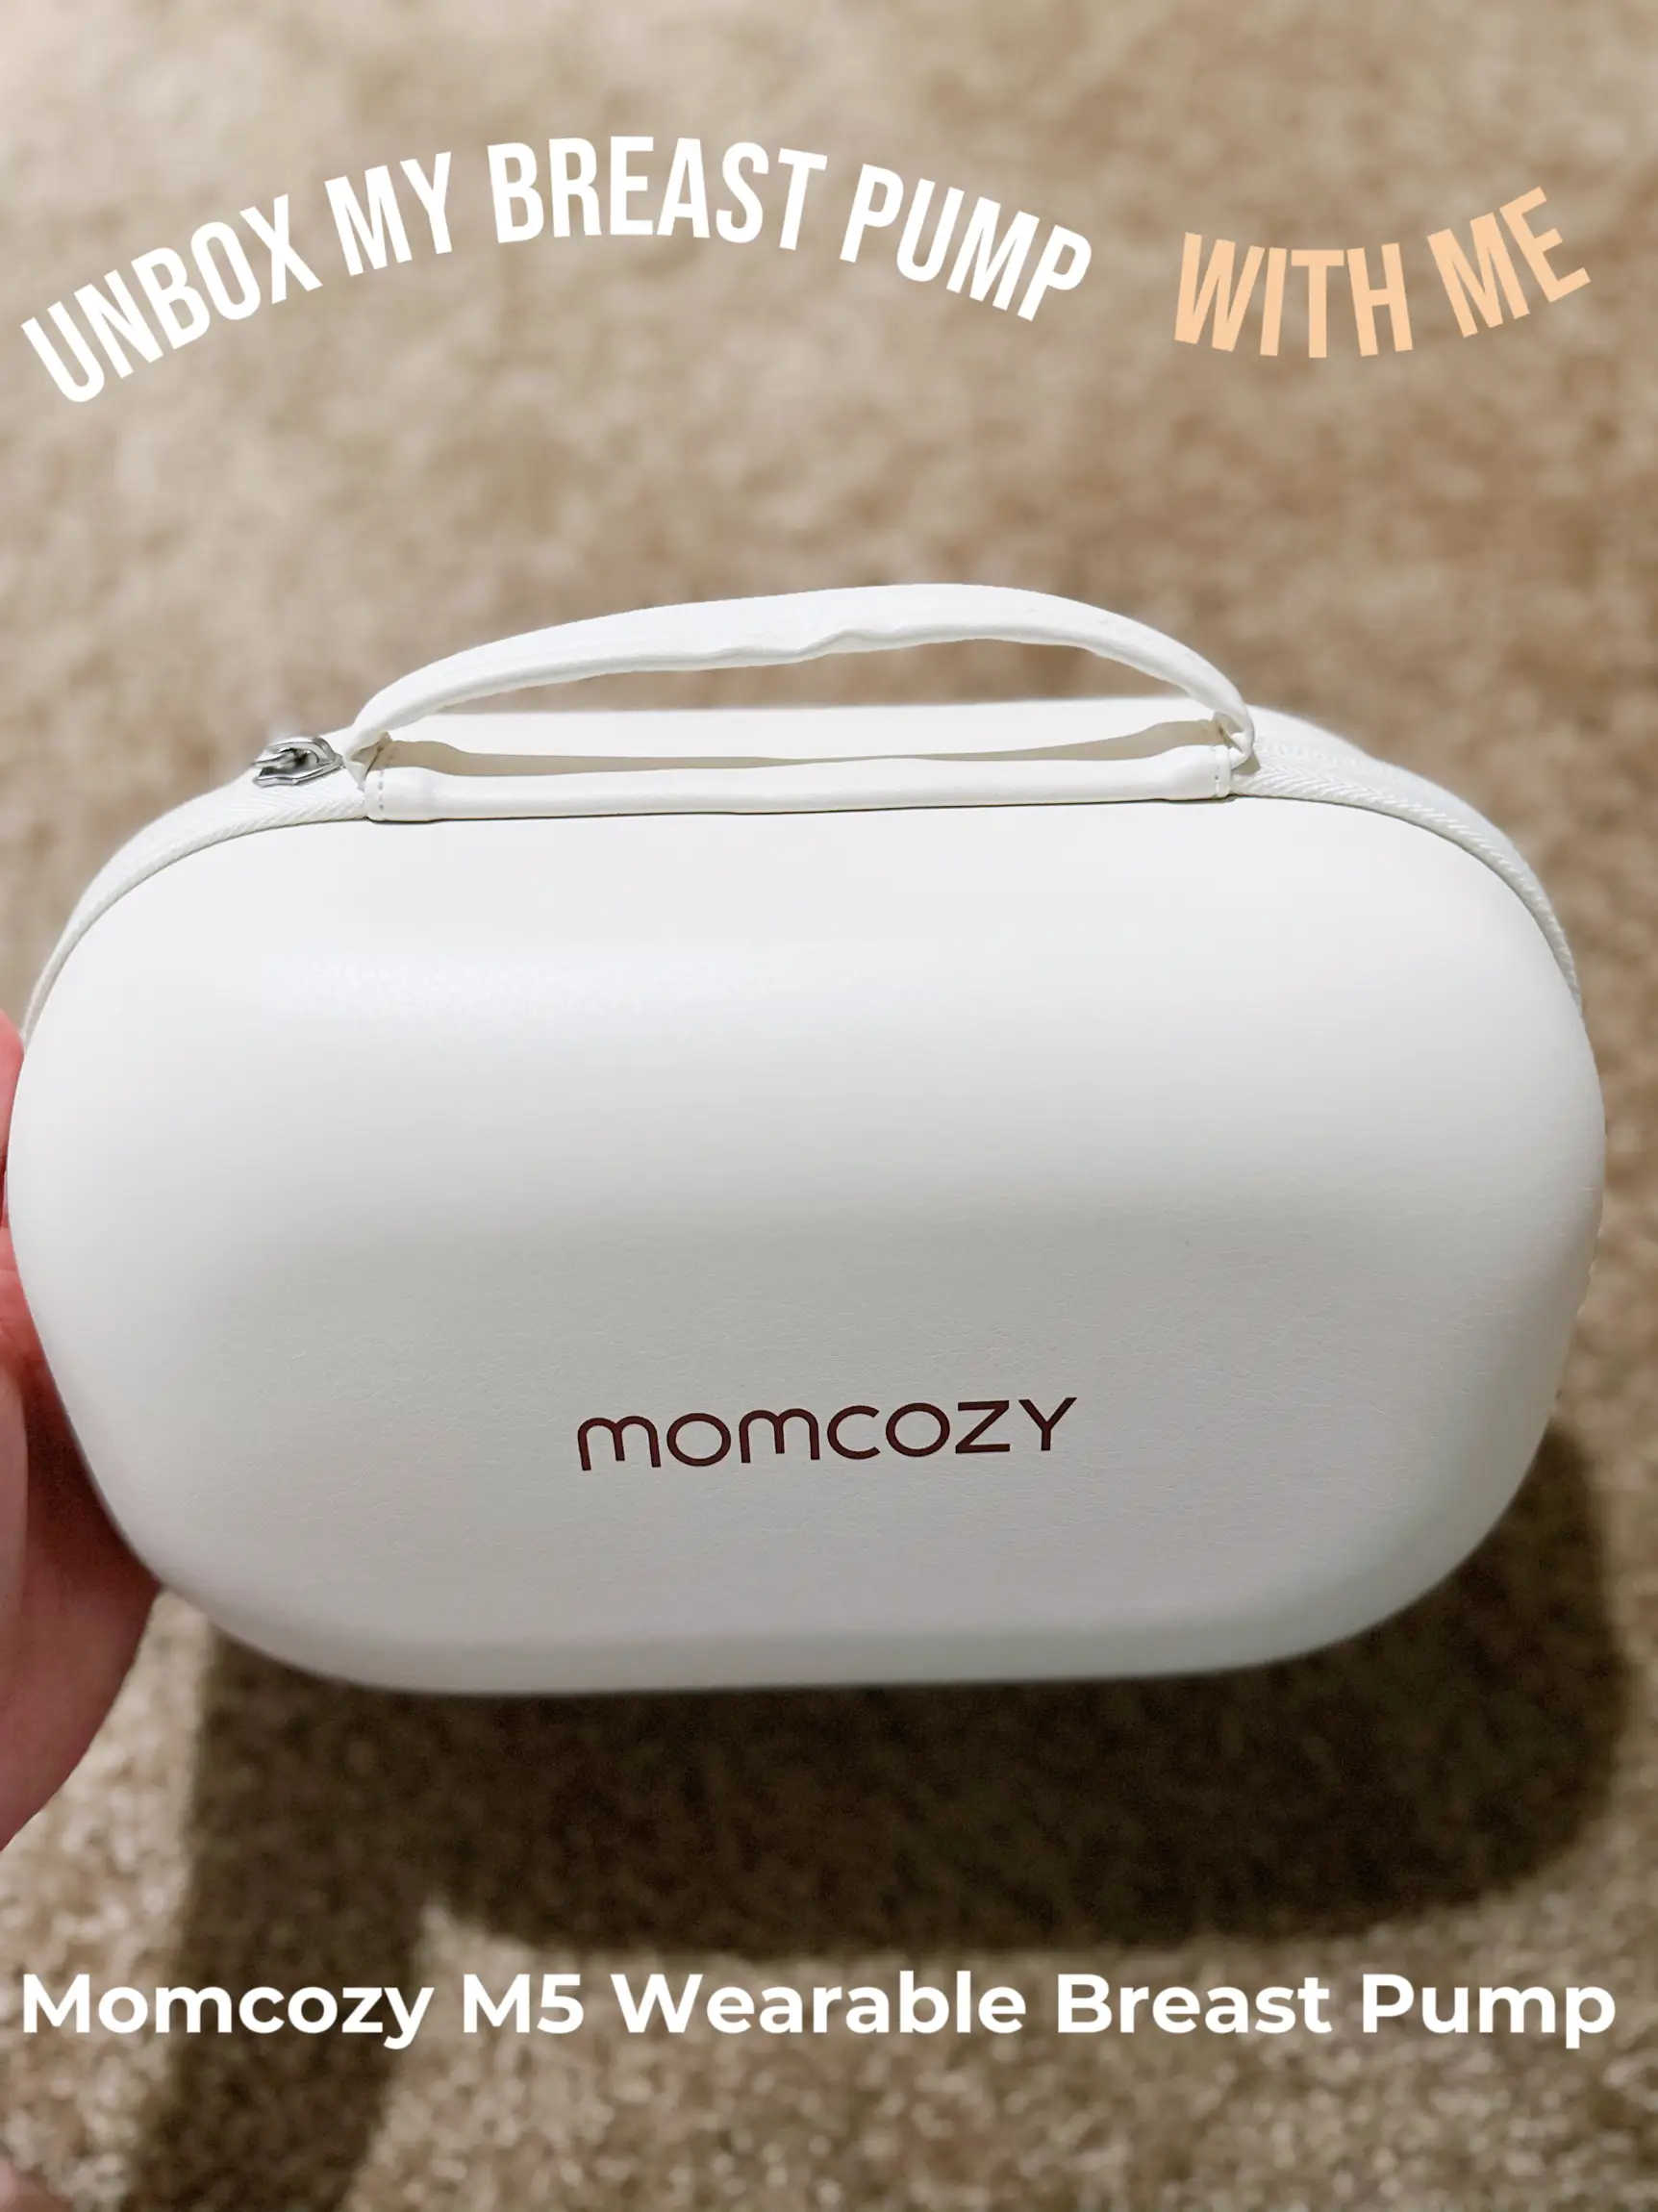 For those of you wondering how to take your momcozy m5 apart and how t